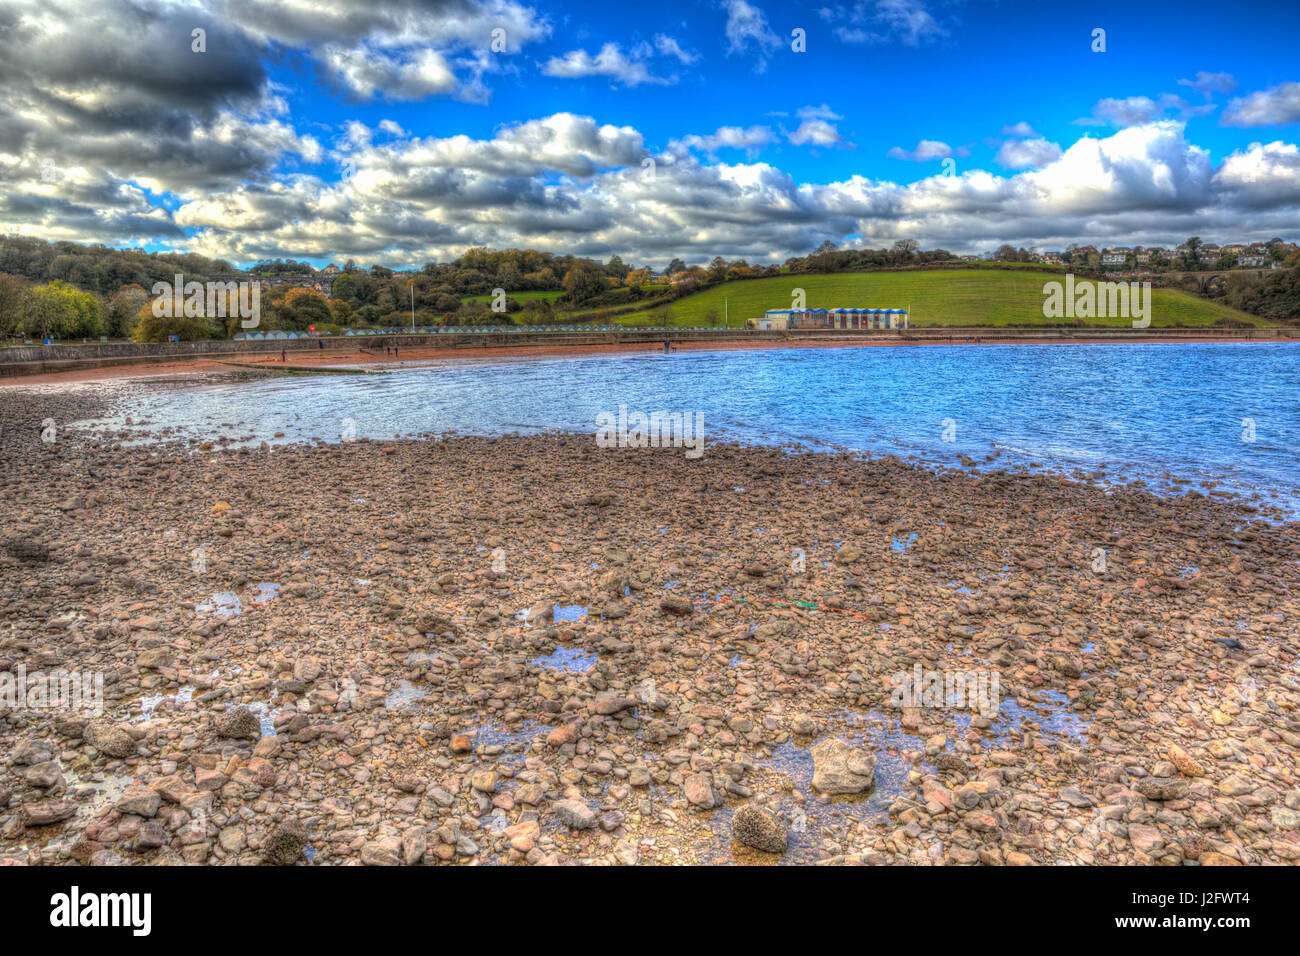 Broadsands beach south of Torquay Devon UK in colourful HDR Stock Photo